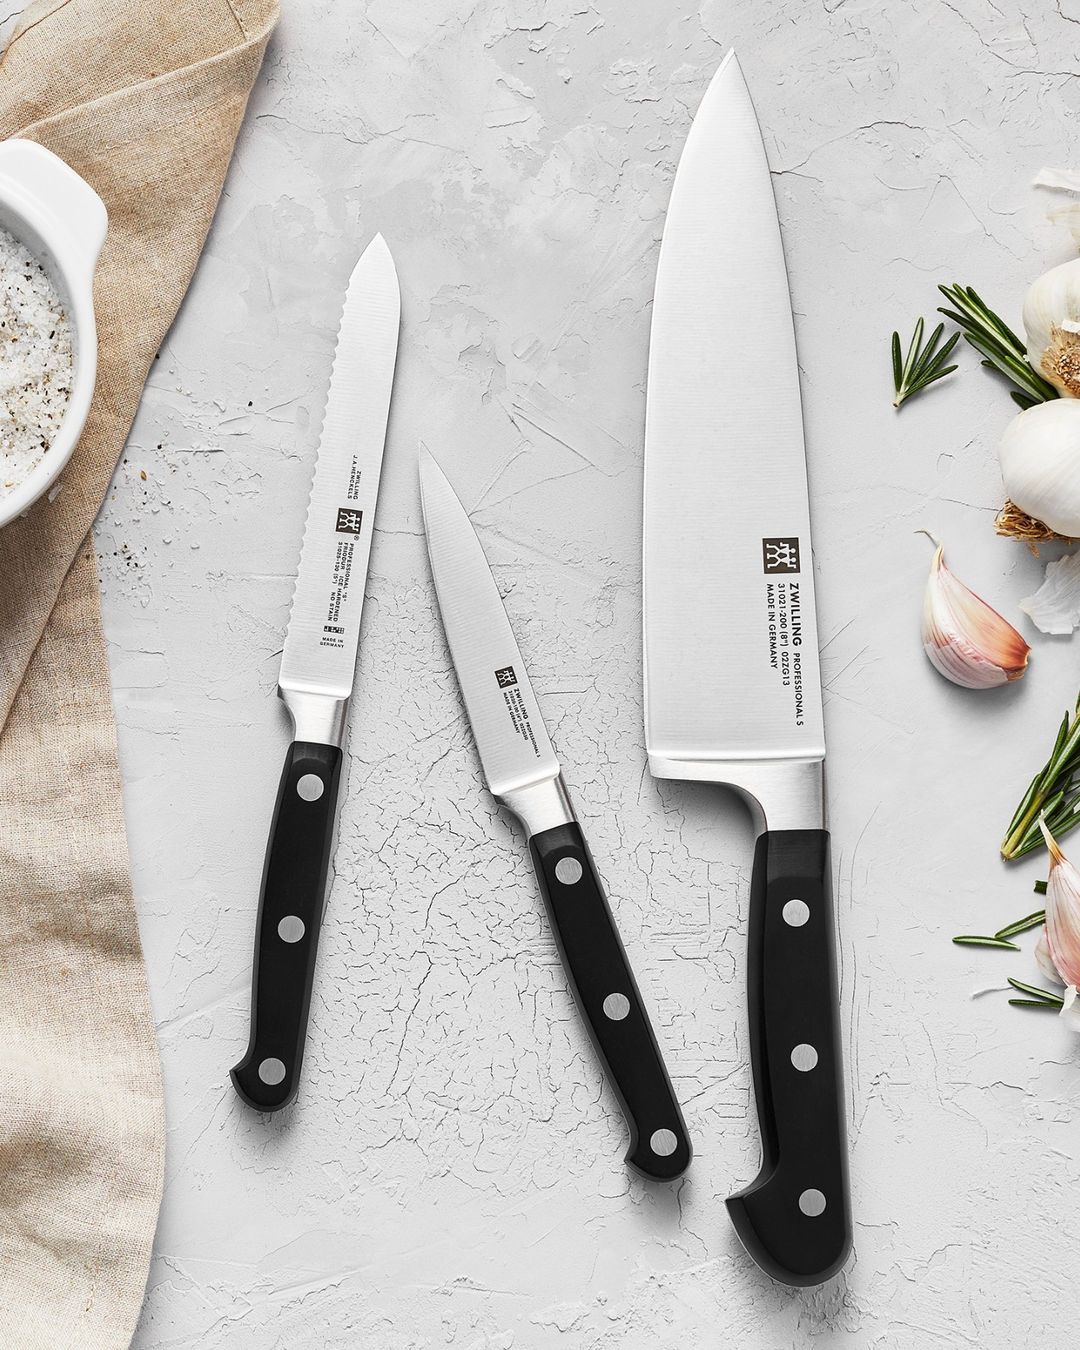 Three knives of different sizes sitting on a countertop with salt to the left and garlic gloves to the right.